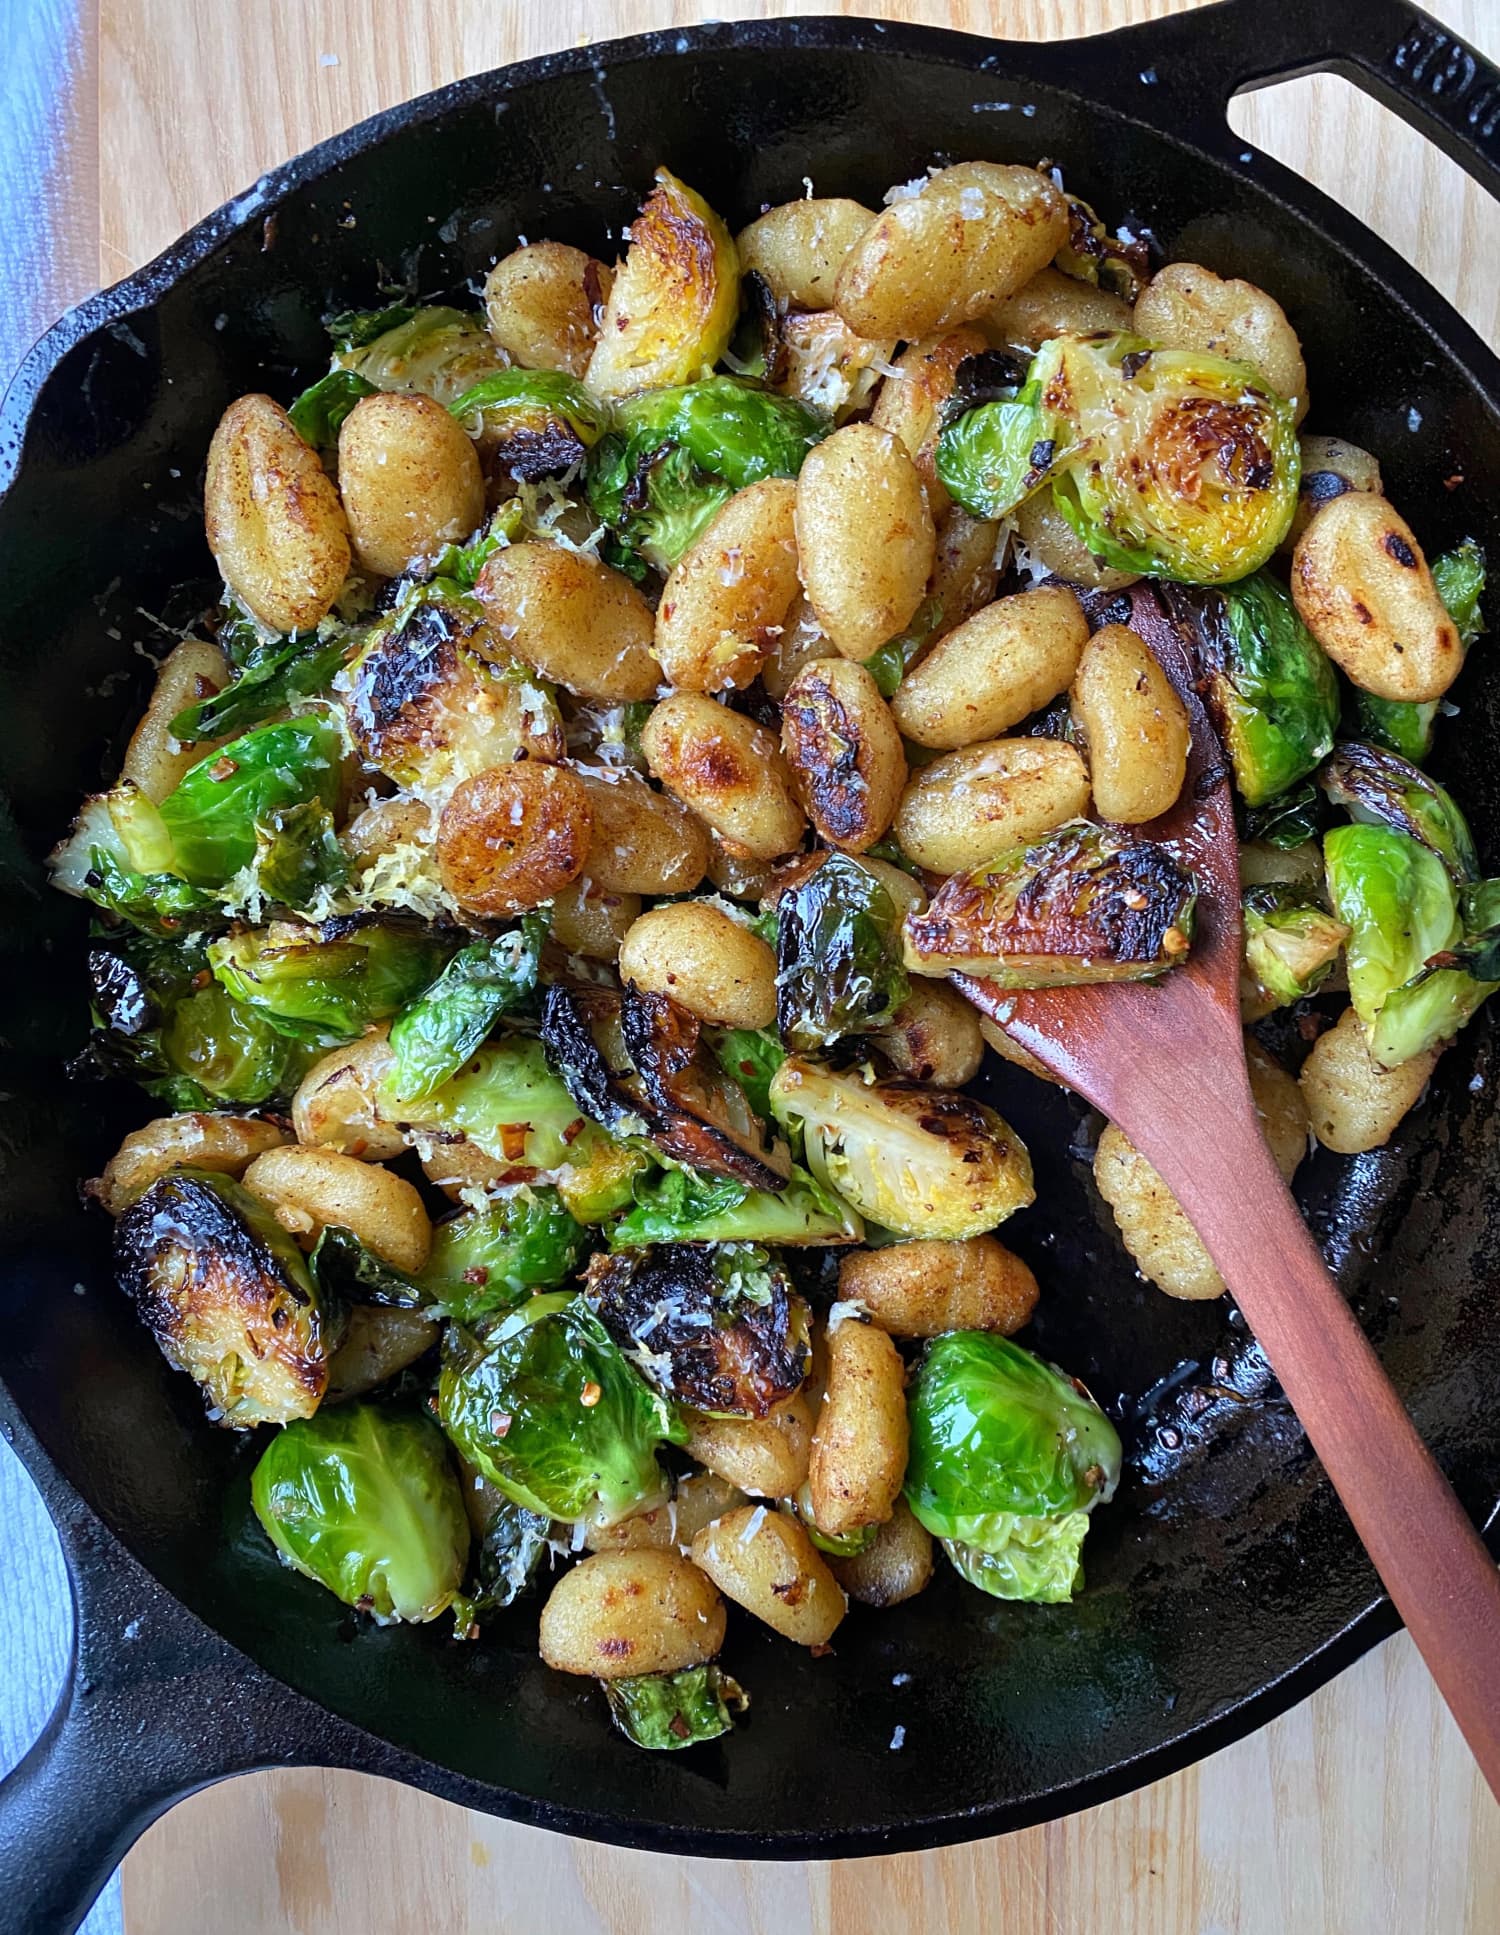 This Gnocchi-with-Brussels-Sprouts Dish Was the Best Thing I Made in ...